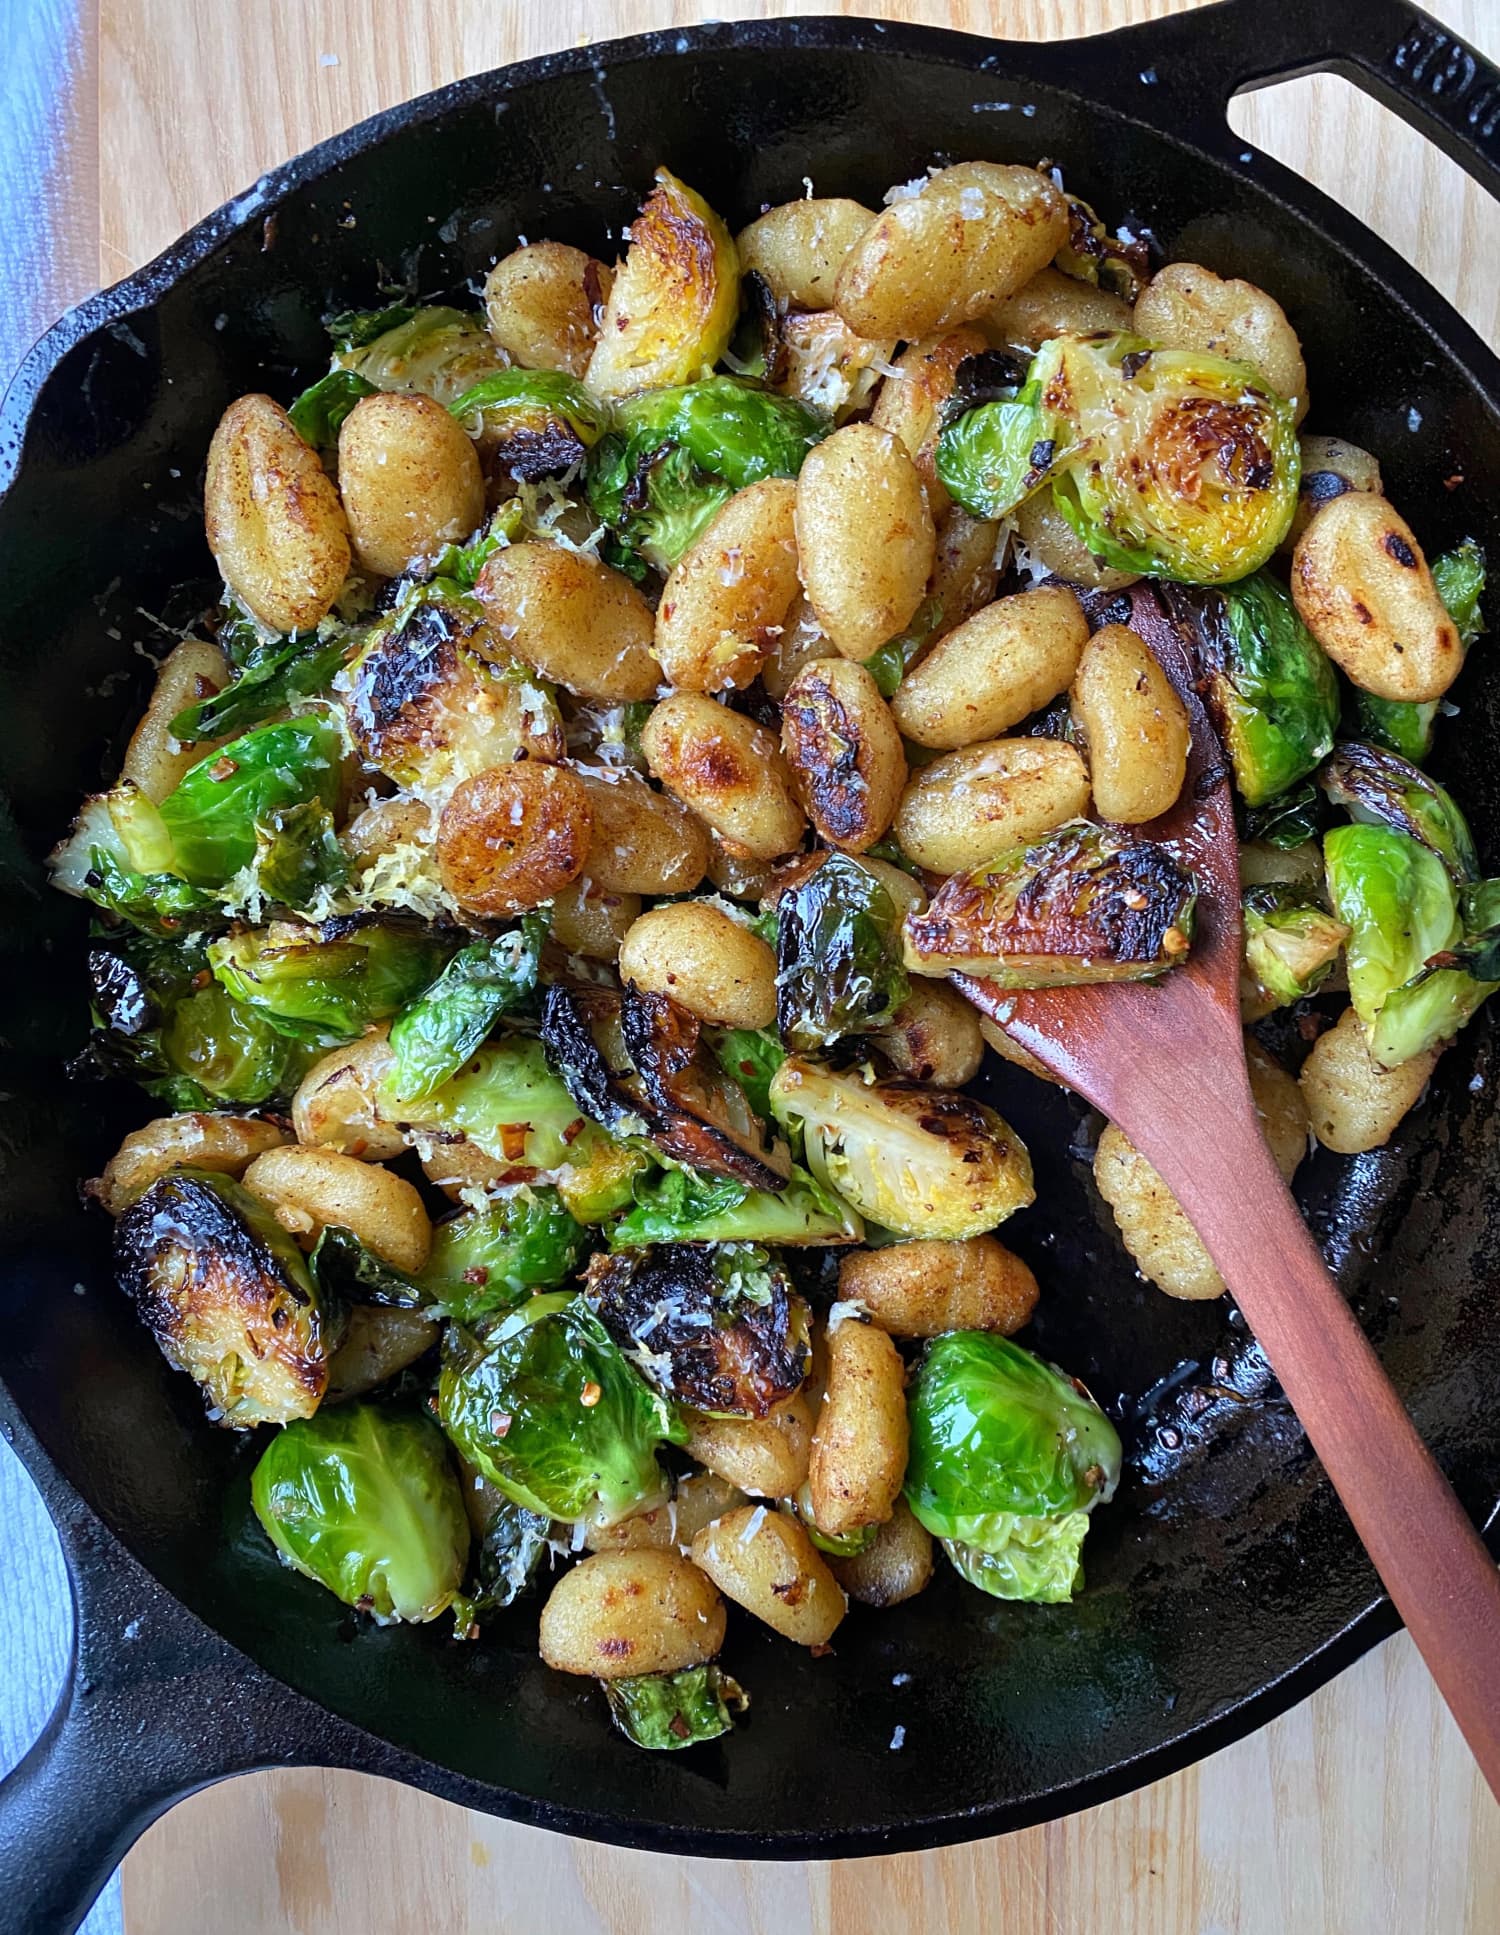 This Gnocchi-with-Brussels-Sprouts Dish Was the Best Thing I Made in ...